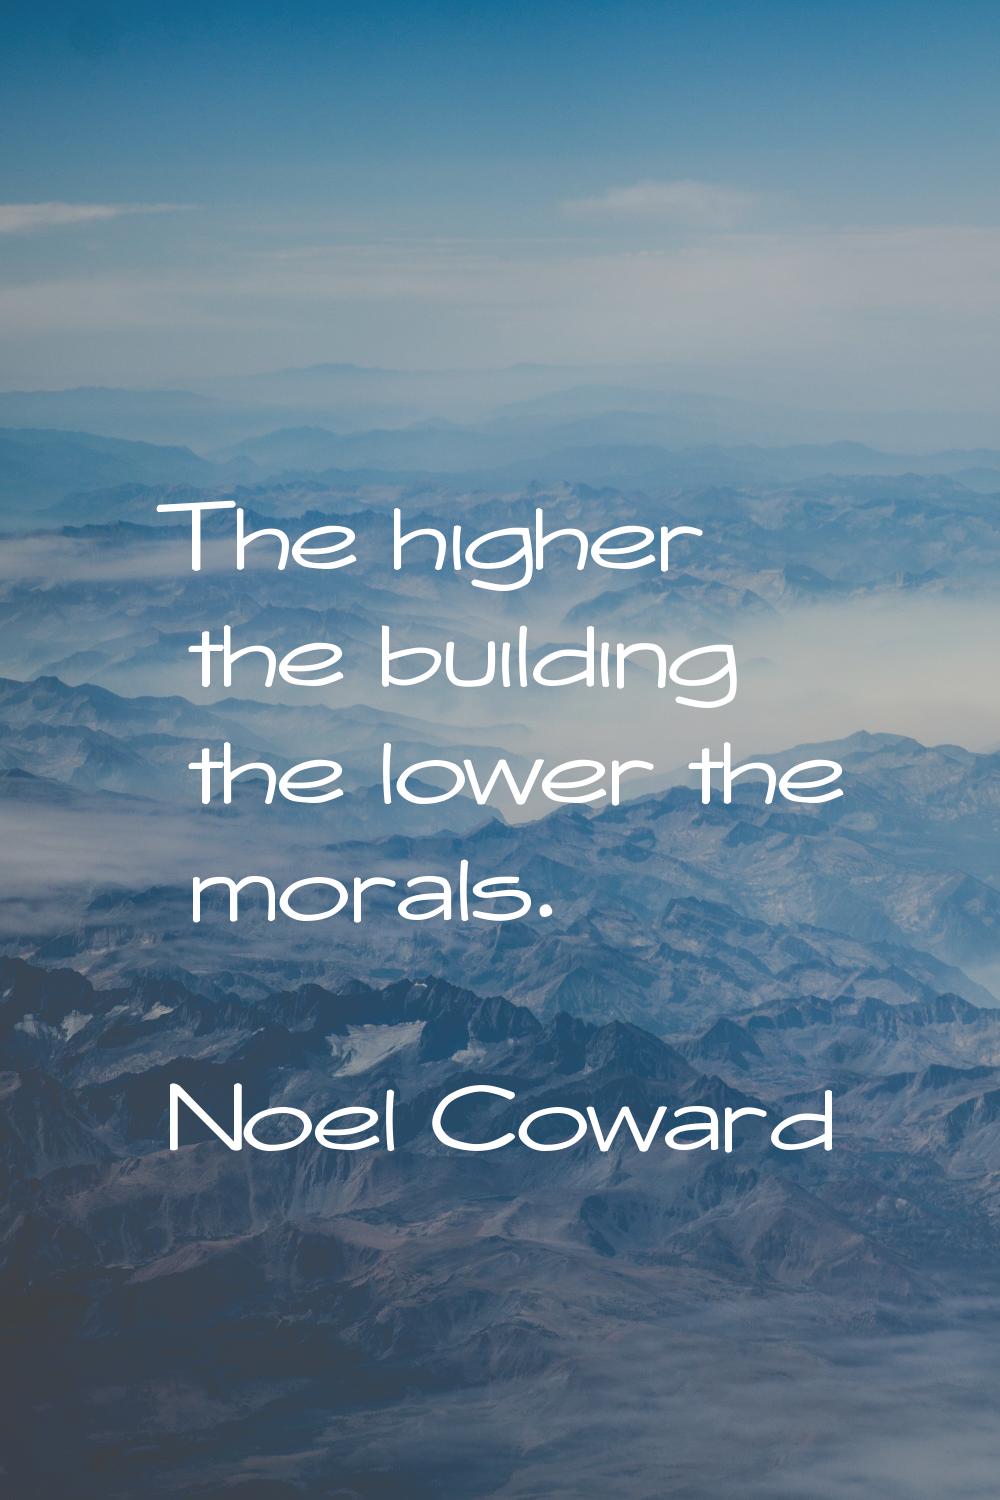 The higher the building the lower the morals.